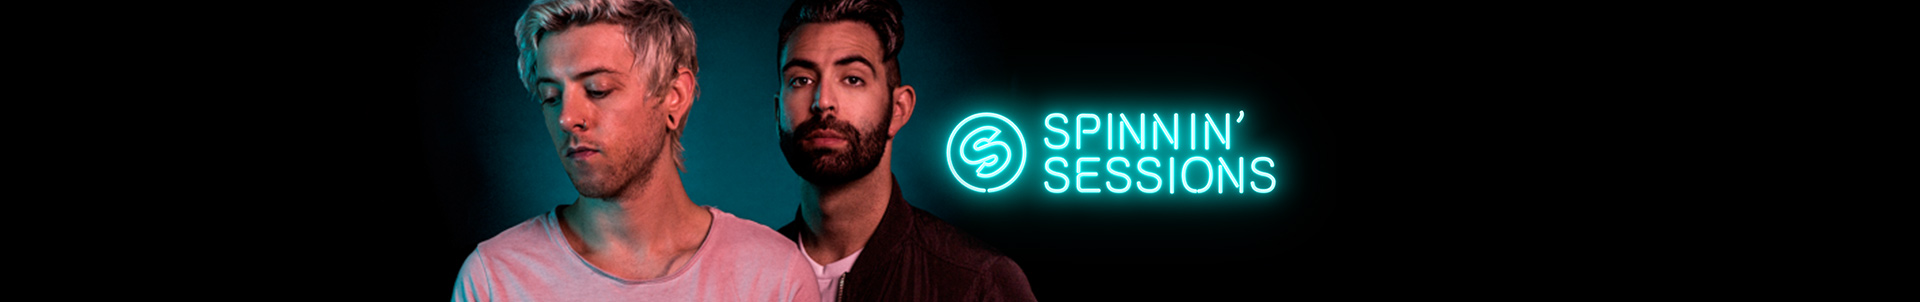 We Rave You premiere: Spinnin’ Sessions Radio Show with a guest mix by Breathe Carolina